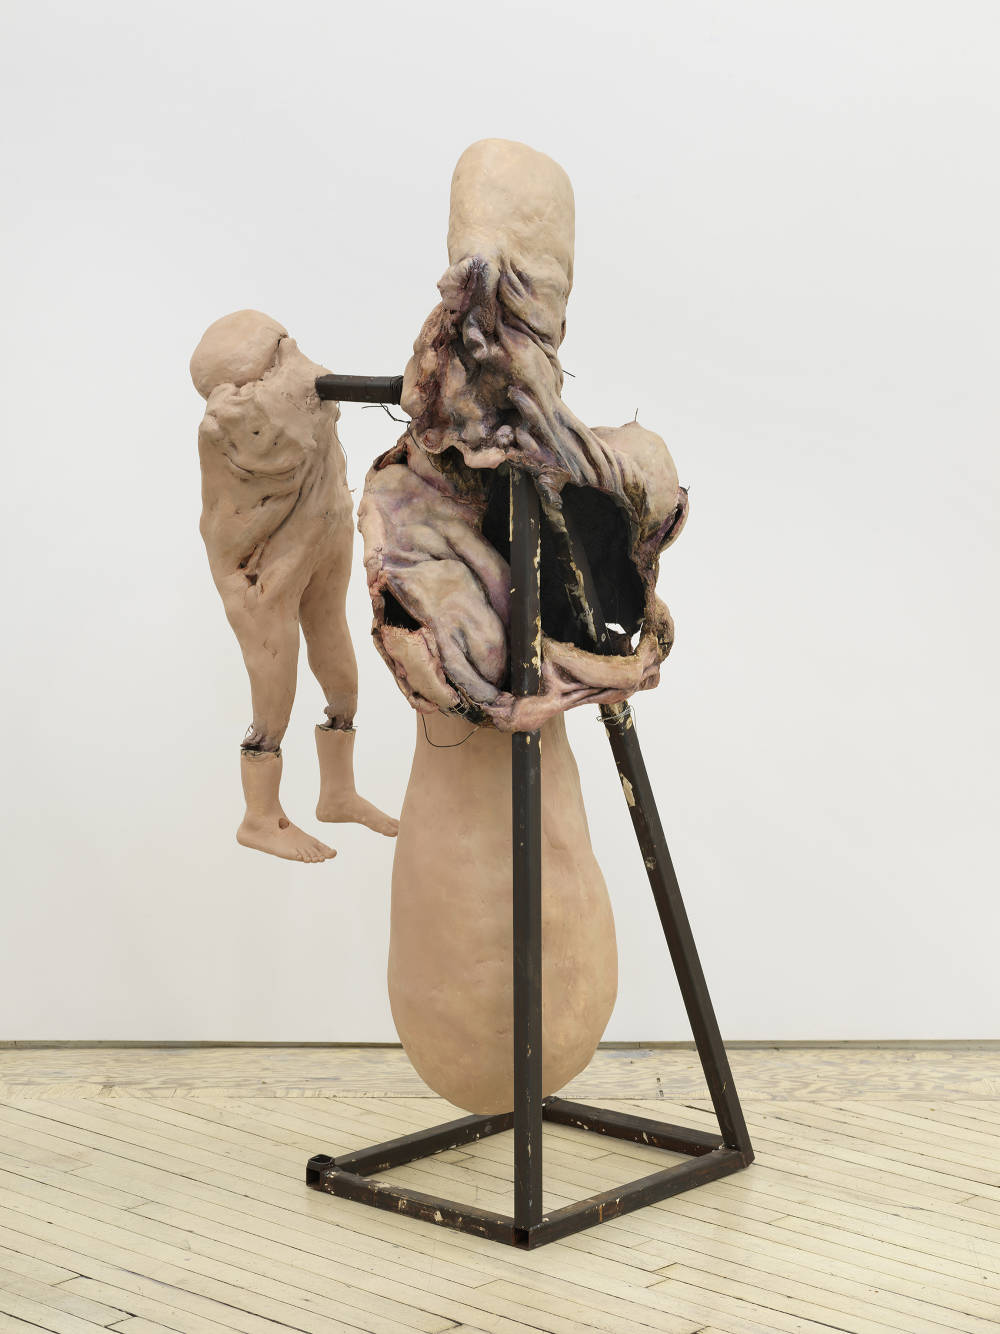 In a gallery space, an abstract sculpture resembling a human form with a steal base. 